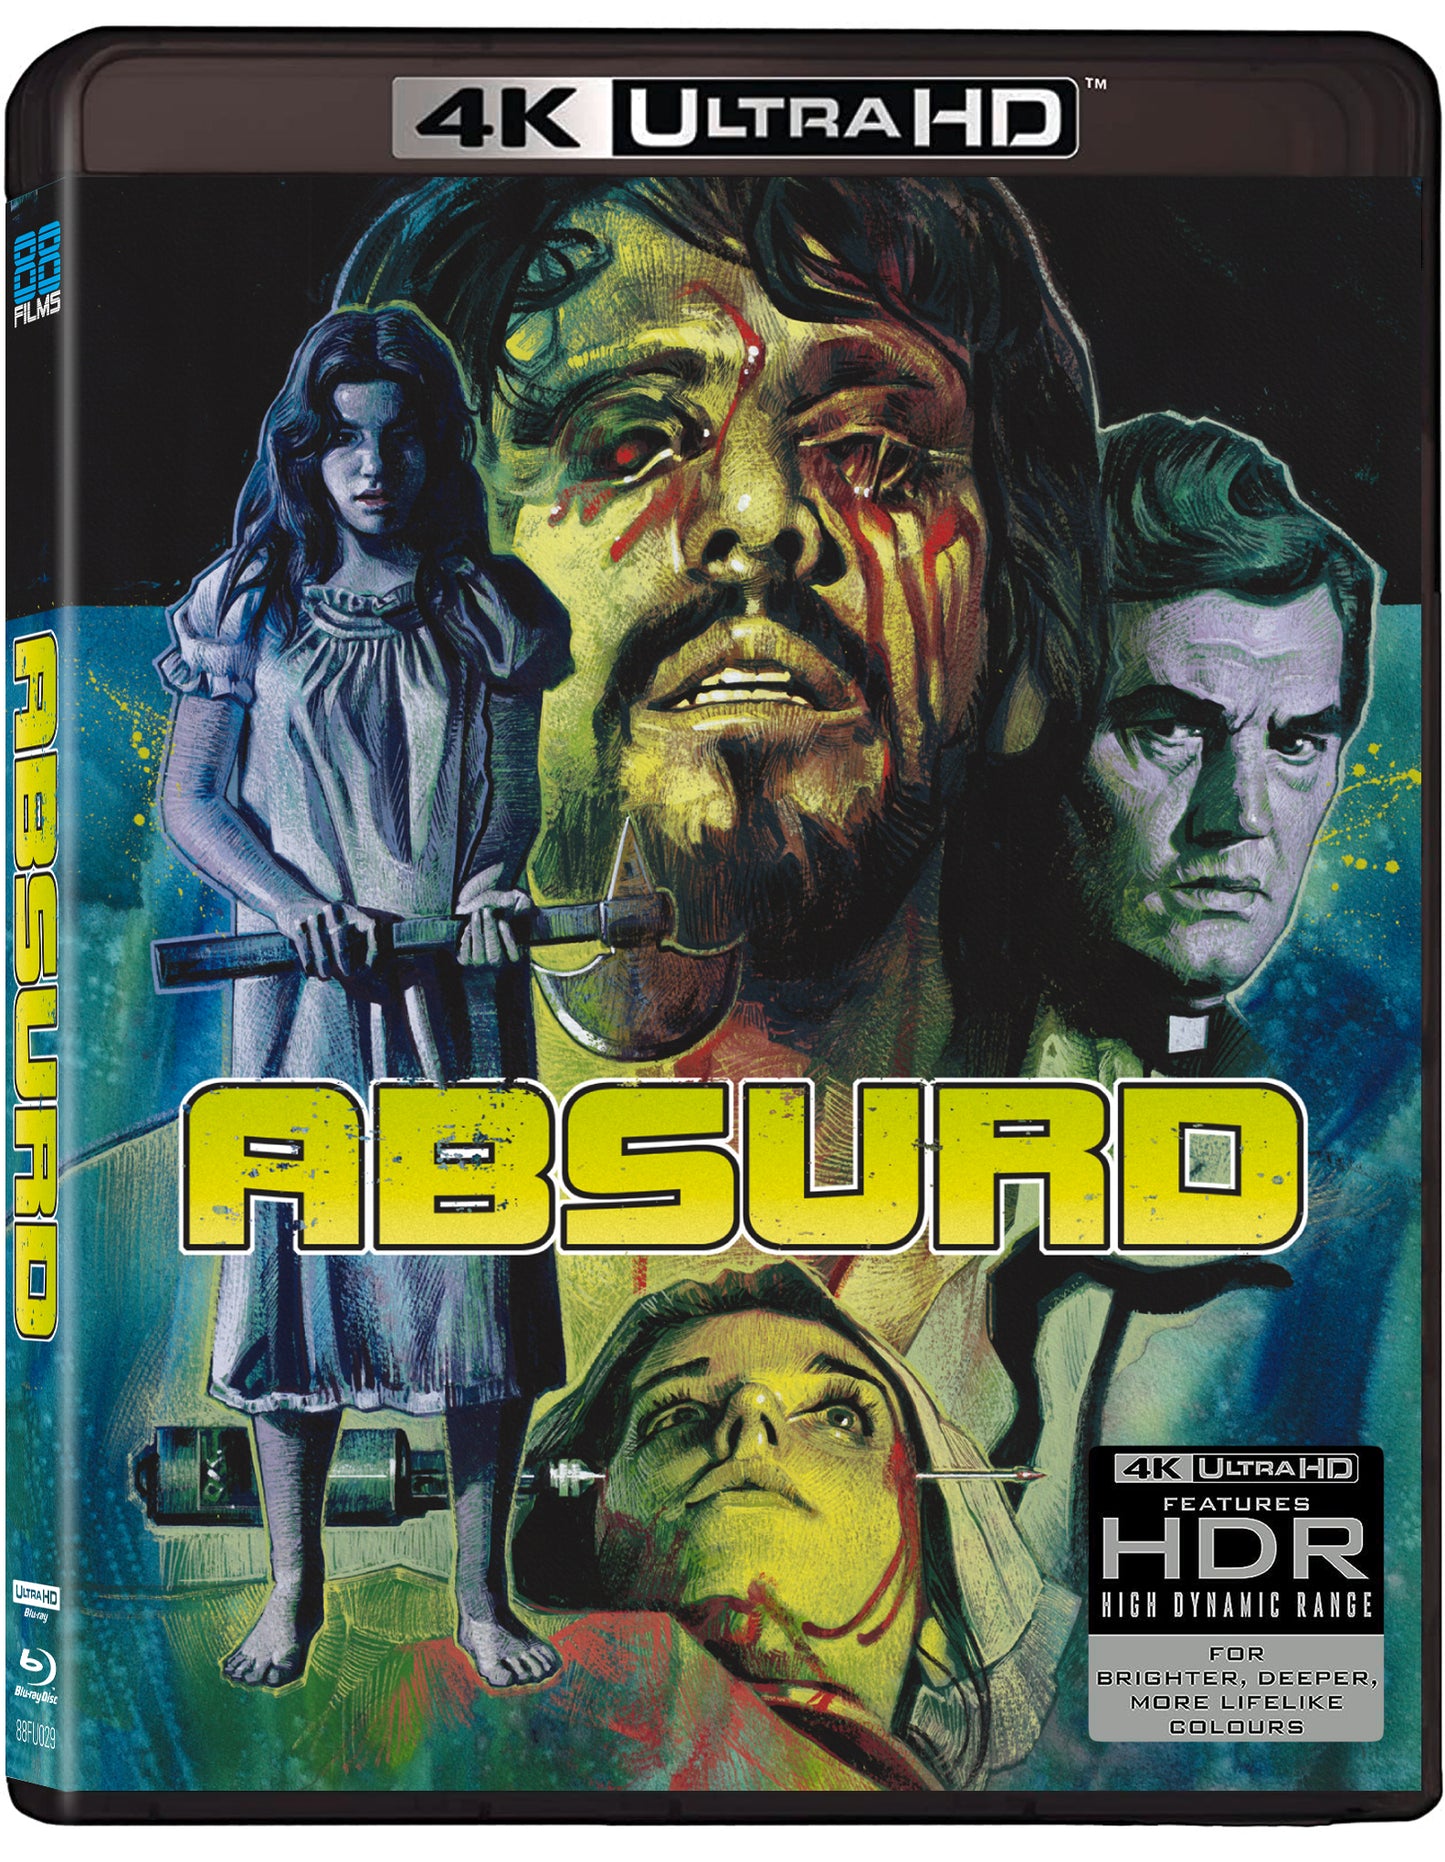 Absurd - The Italian Collection 20 (UHD + Blu-ray) - WEBSITE EXCLUSIVE EDITION